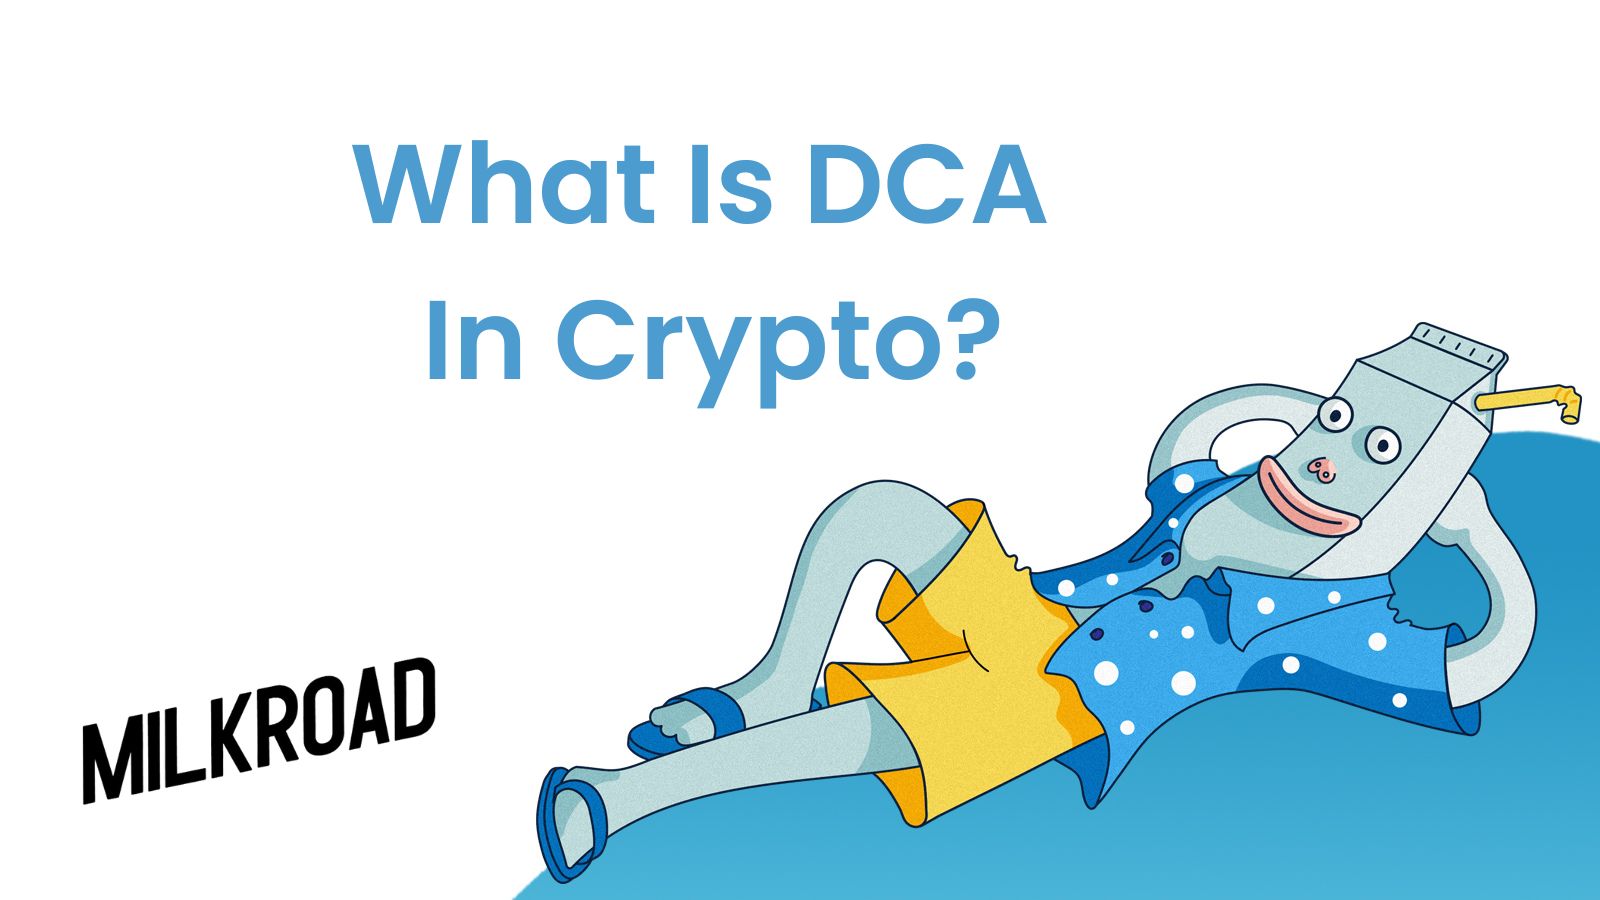 What Is DCA In Crypto?